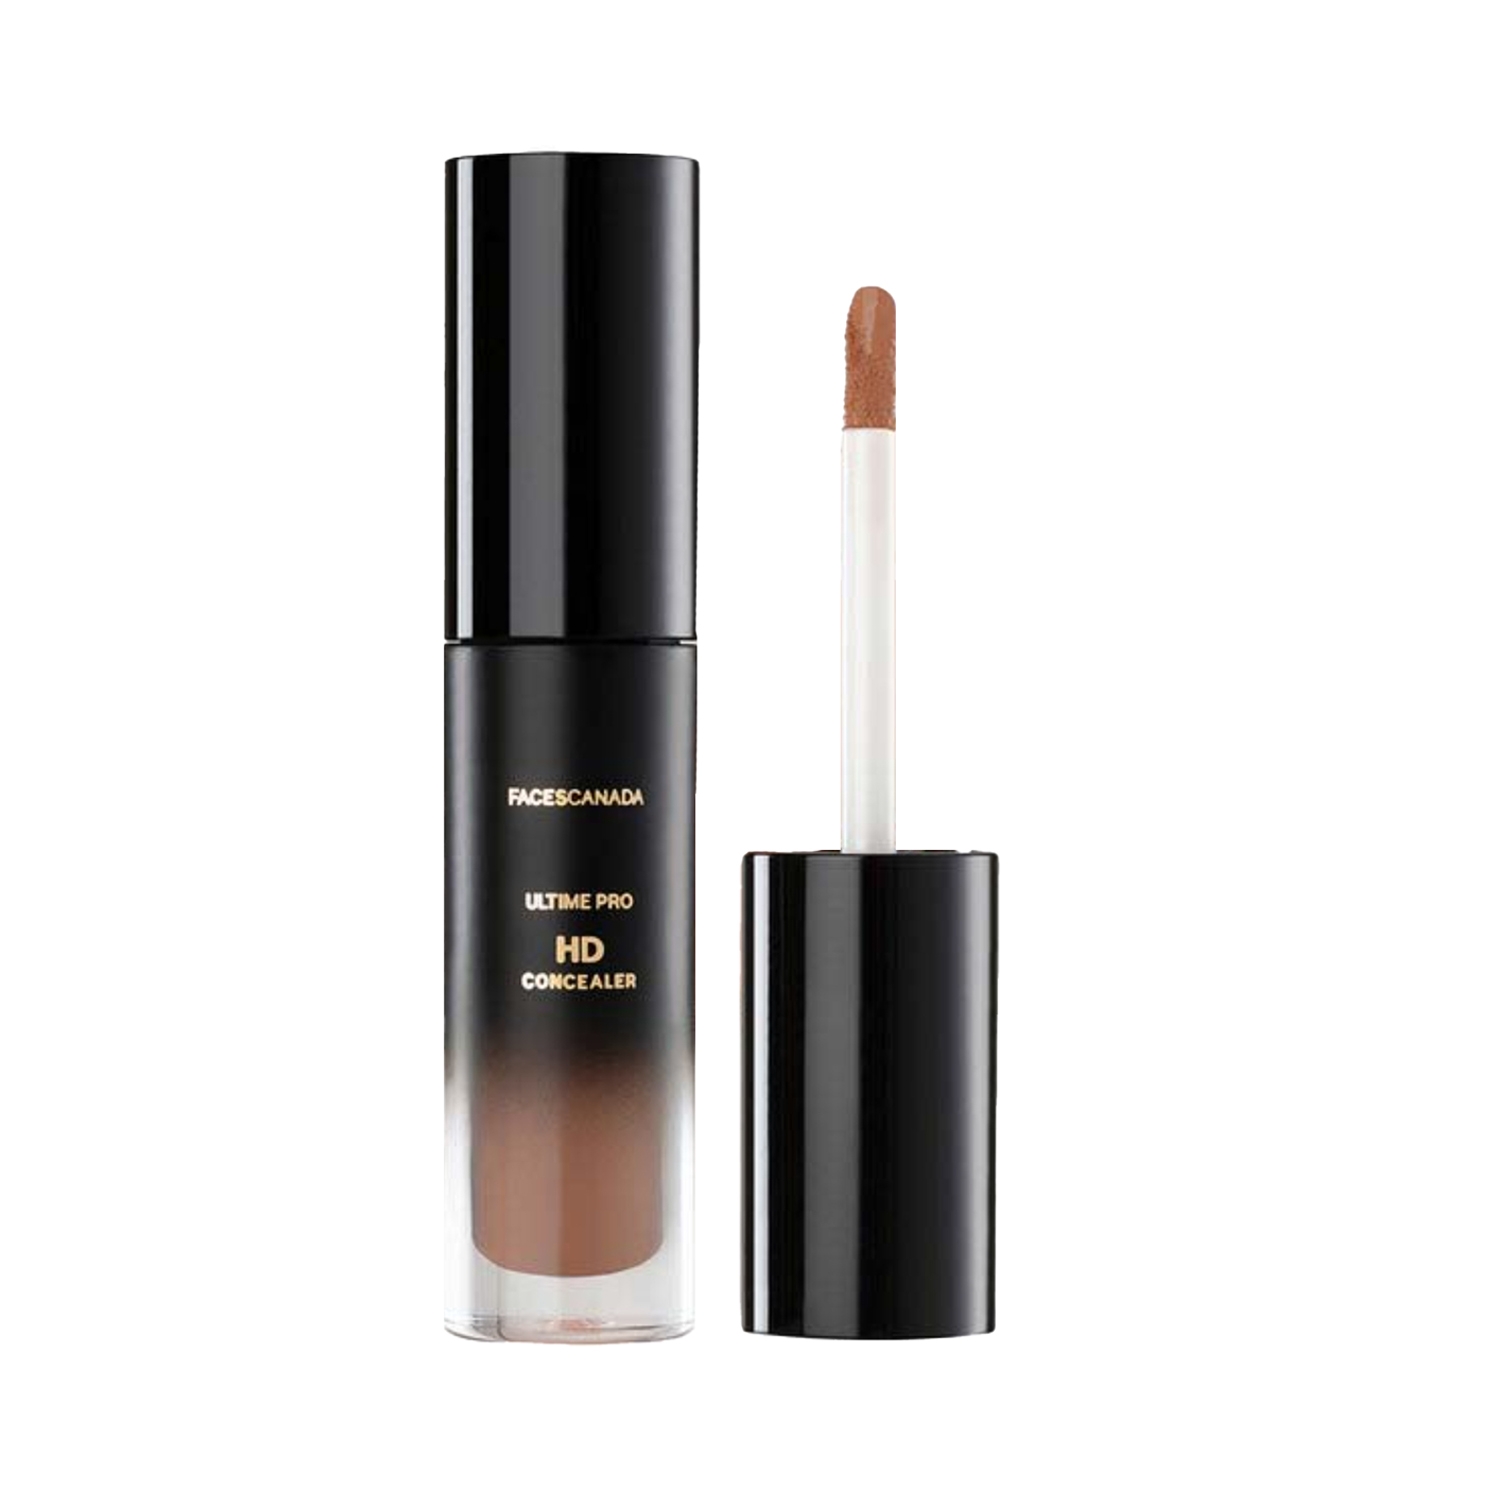 Faces Canada | Faces Canada Ultime Pro HD Concealer - 05 Walnut Spice (3.8ml)